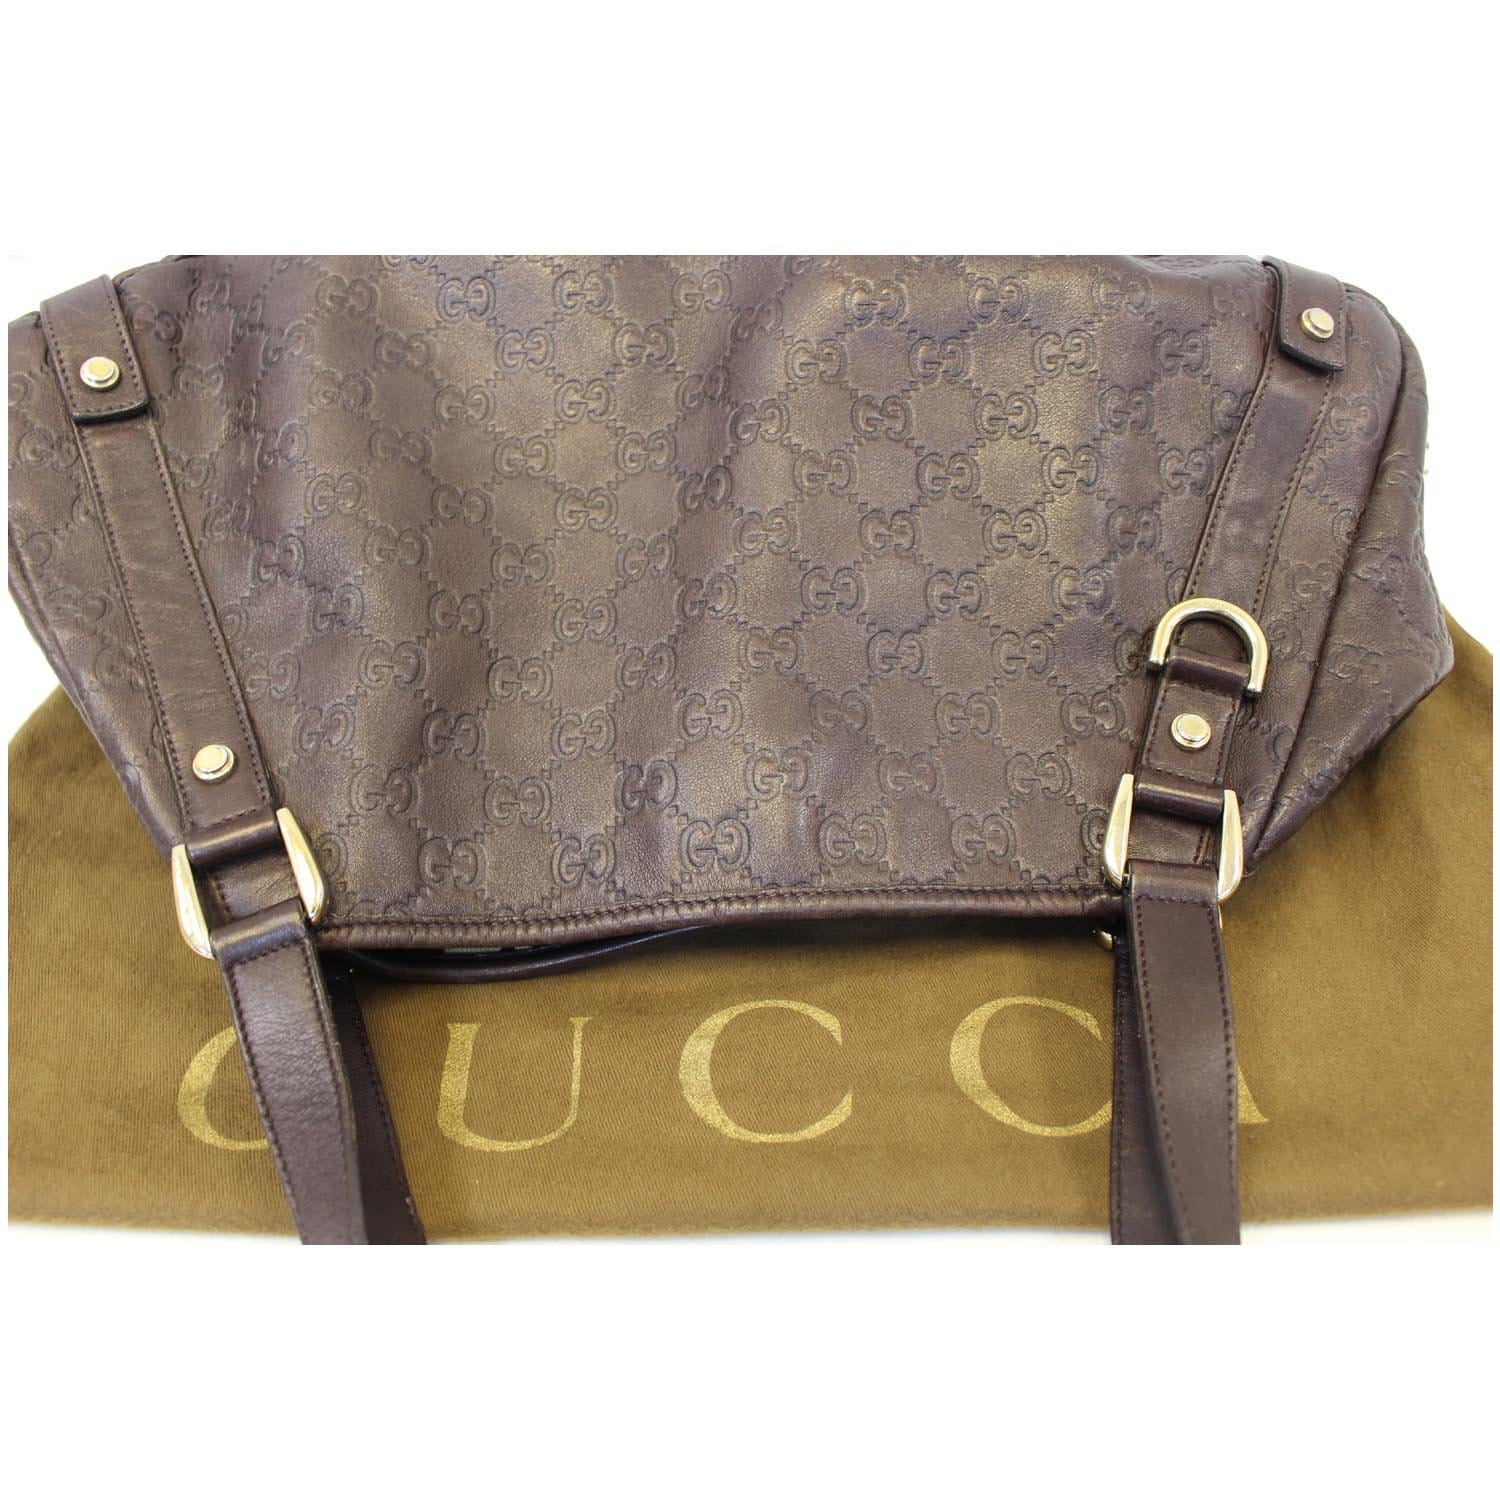 AUTH Gucci Abbey Shoulder Bag Leather Brown 189835 P1502AY410